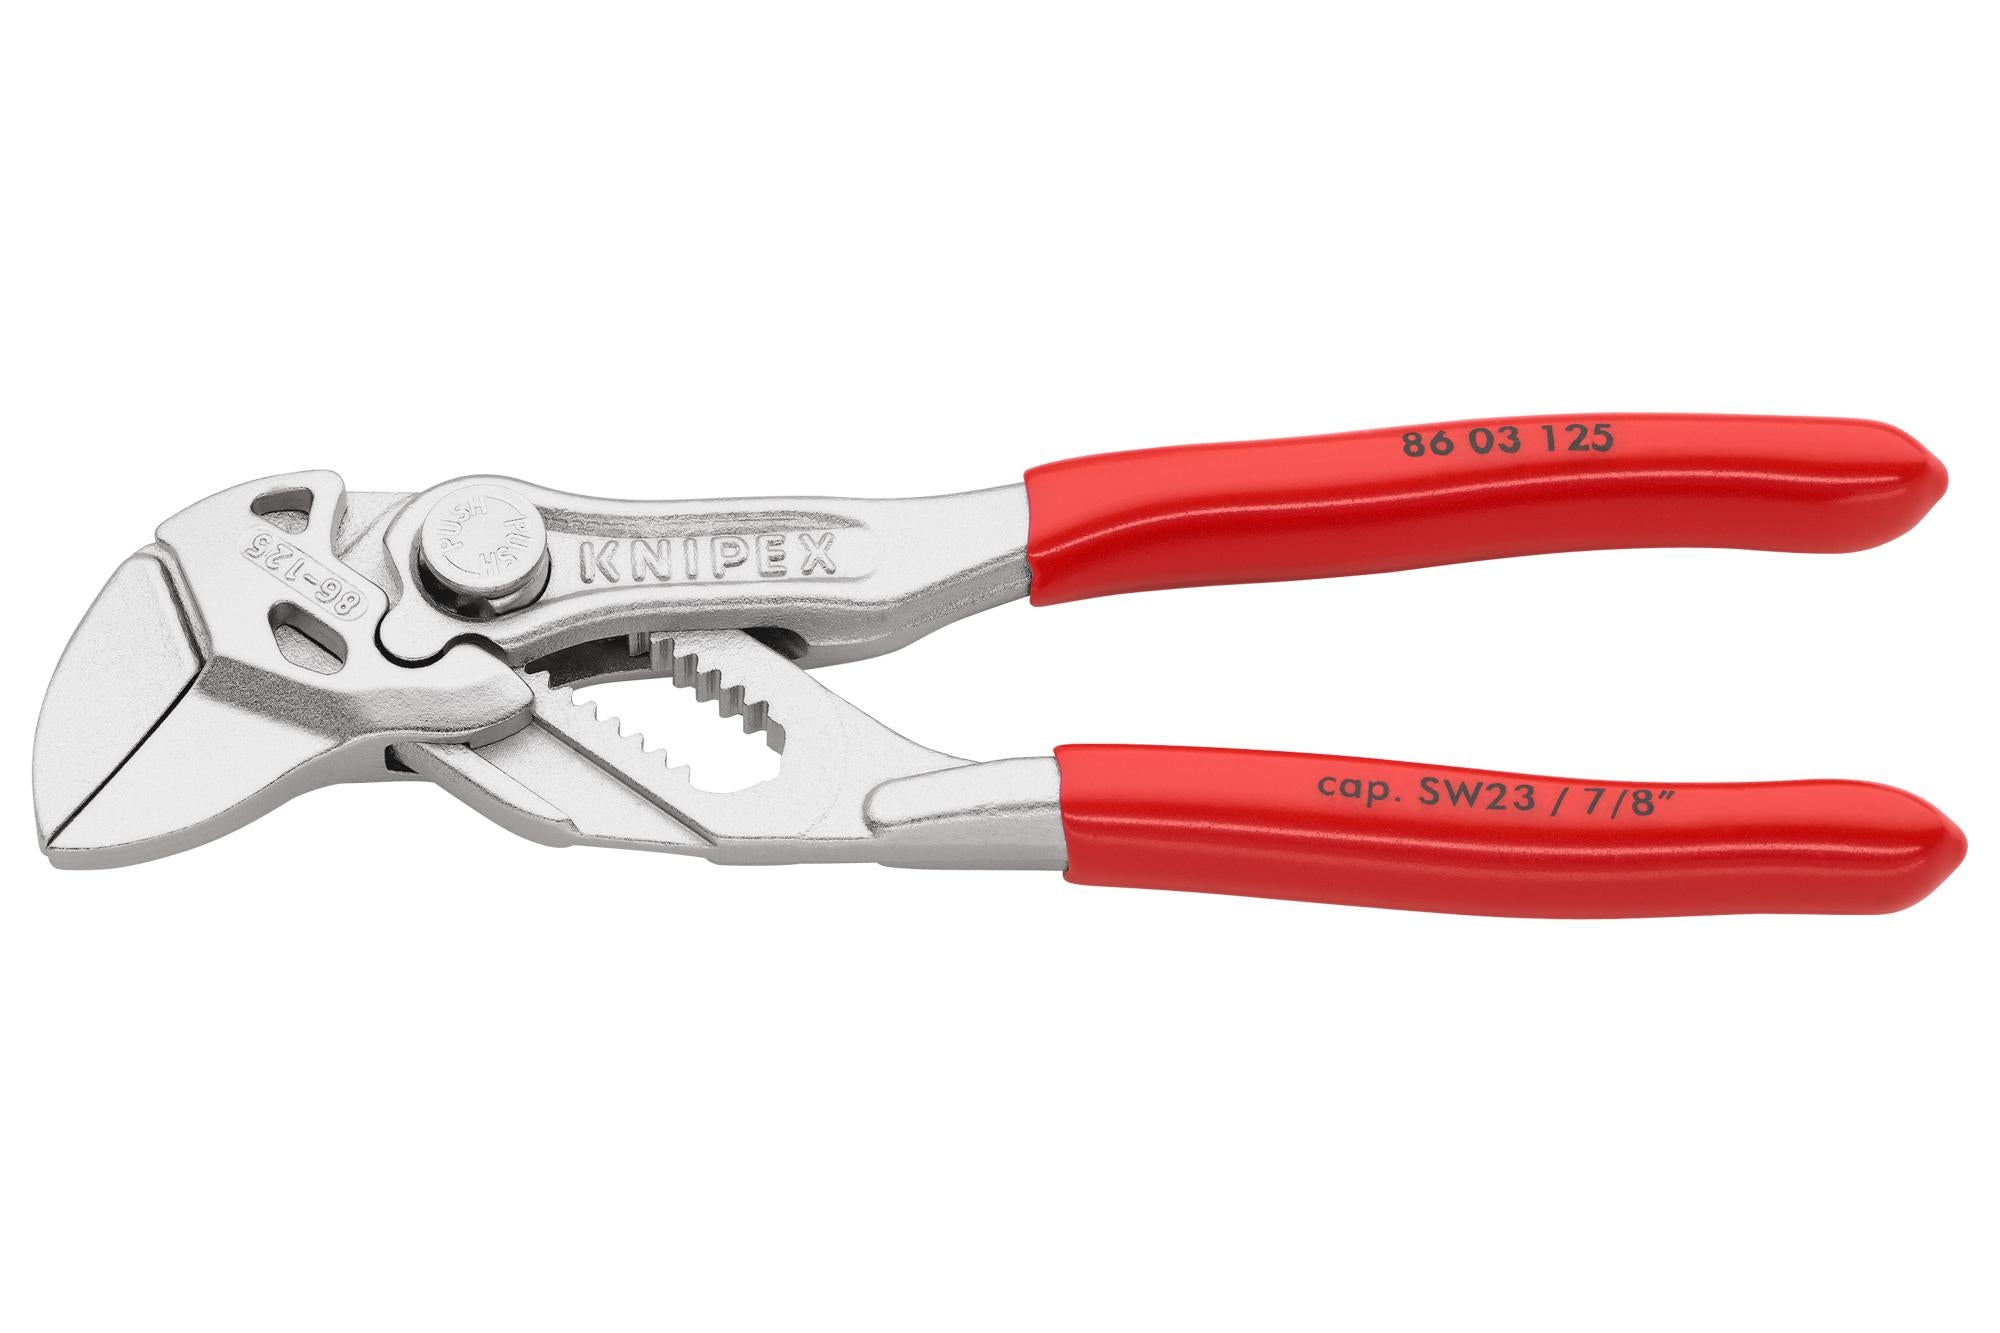 86 03 125 MINI PLIER WRENCH, NICKEL PLATED, 125MM KNIPEX